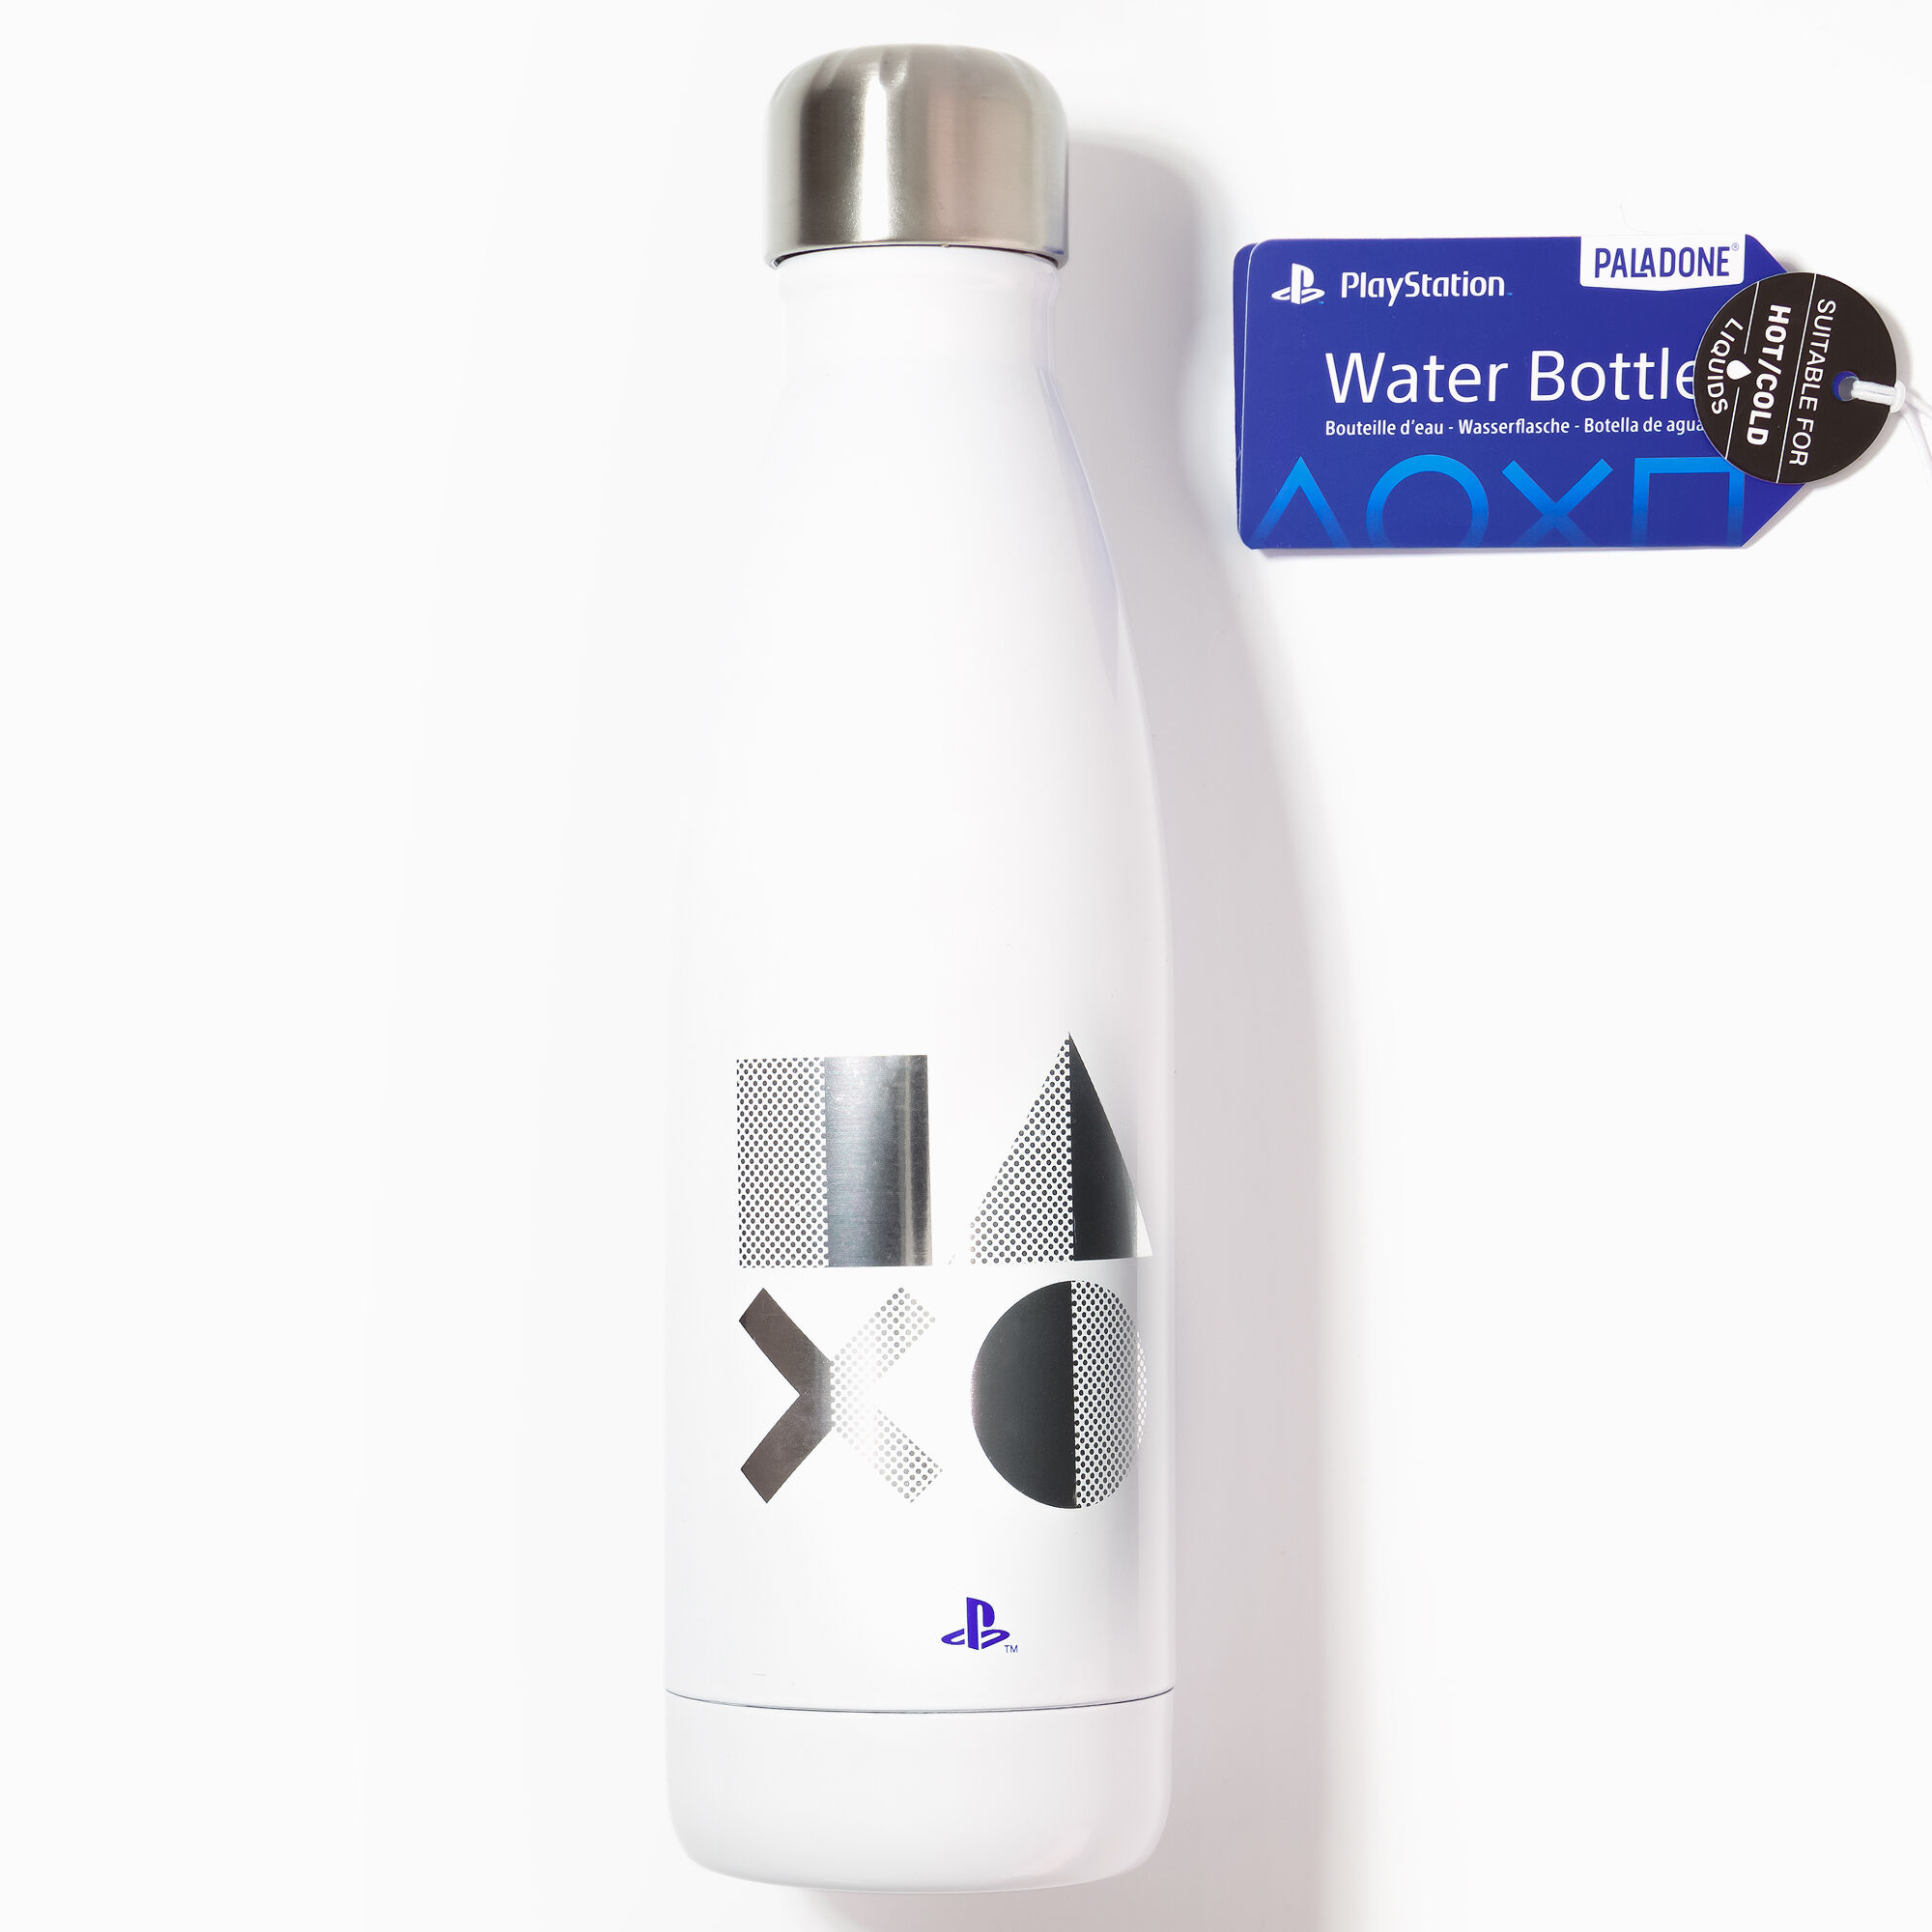 View Claires Playstation Water Bottle White information